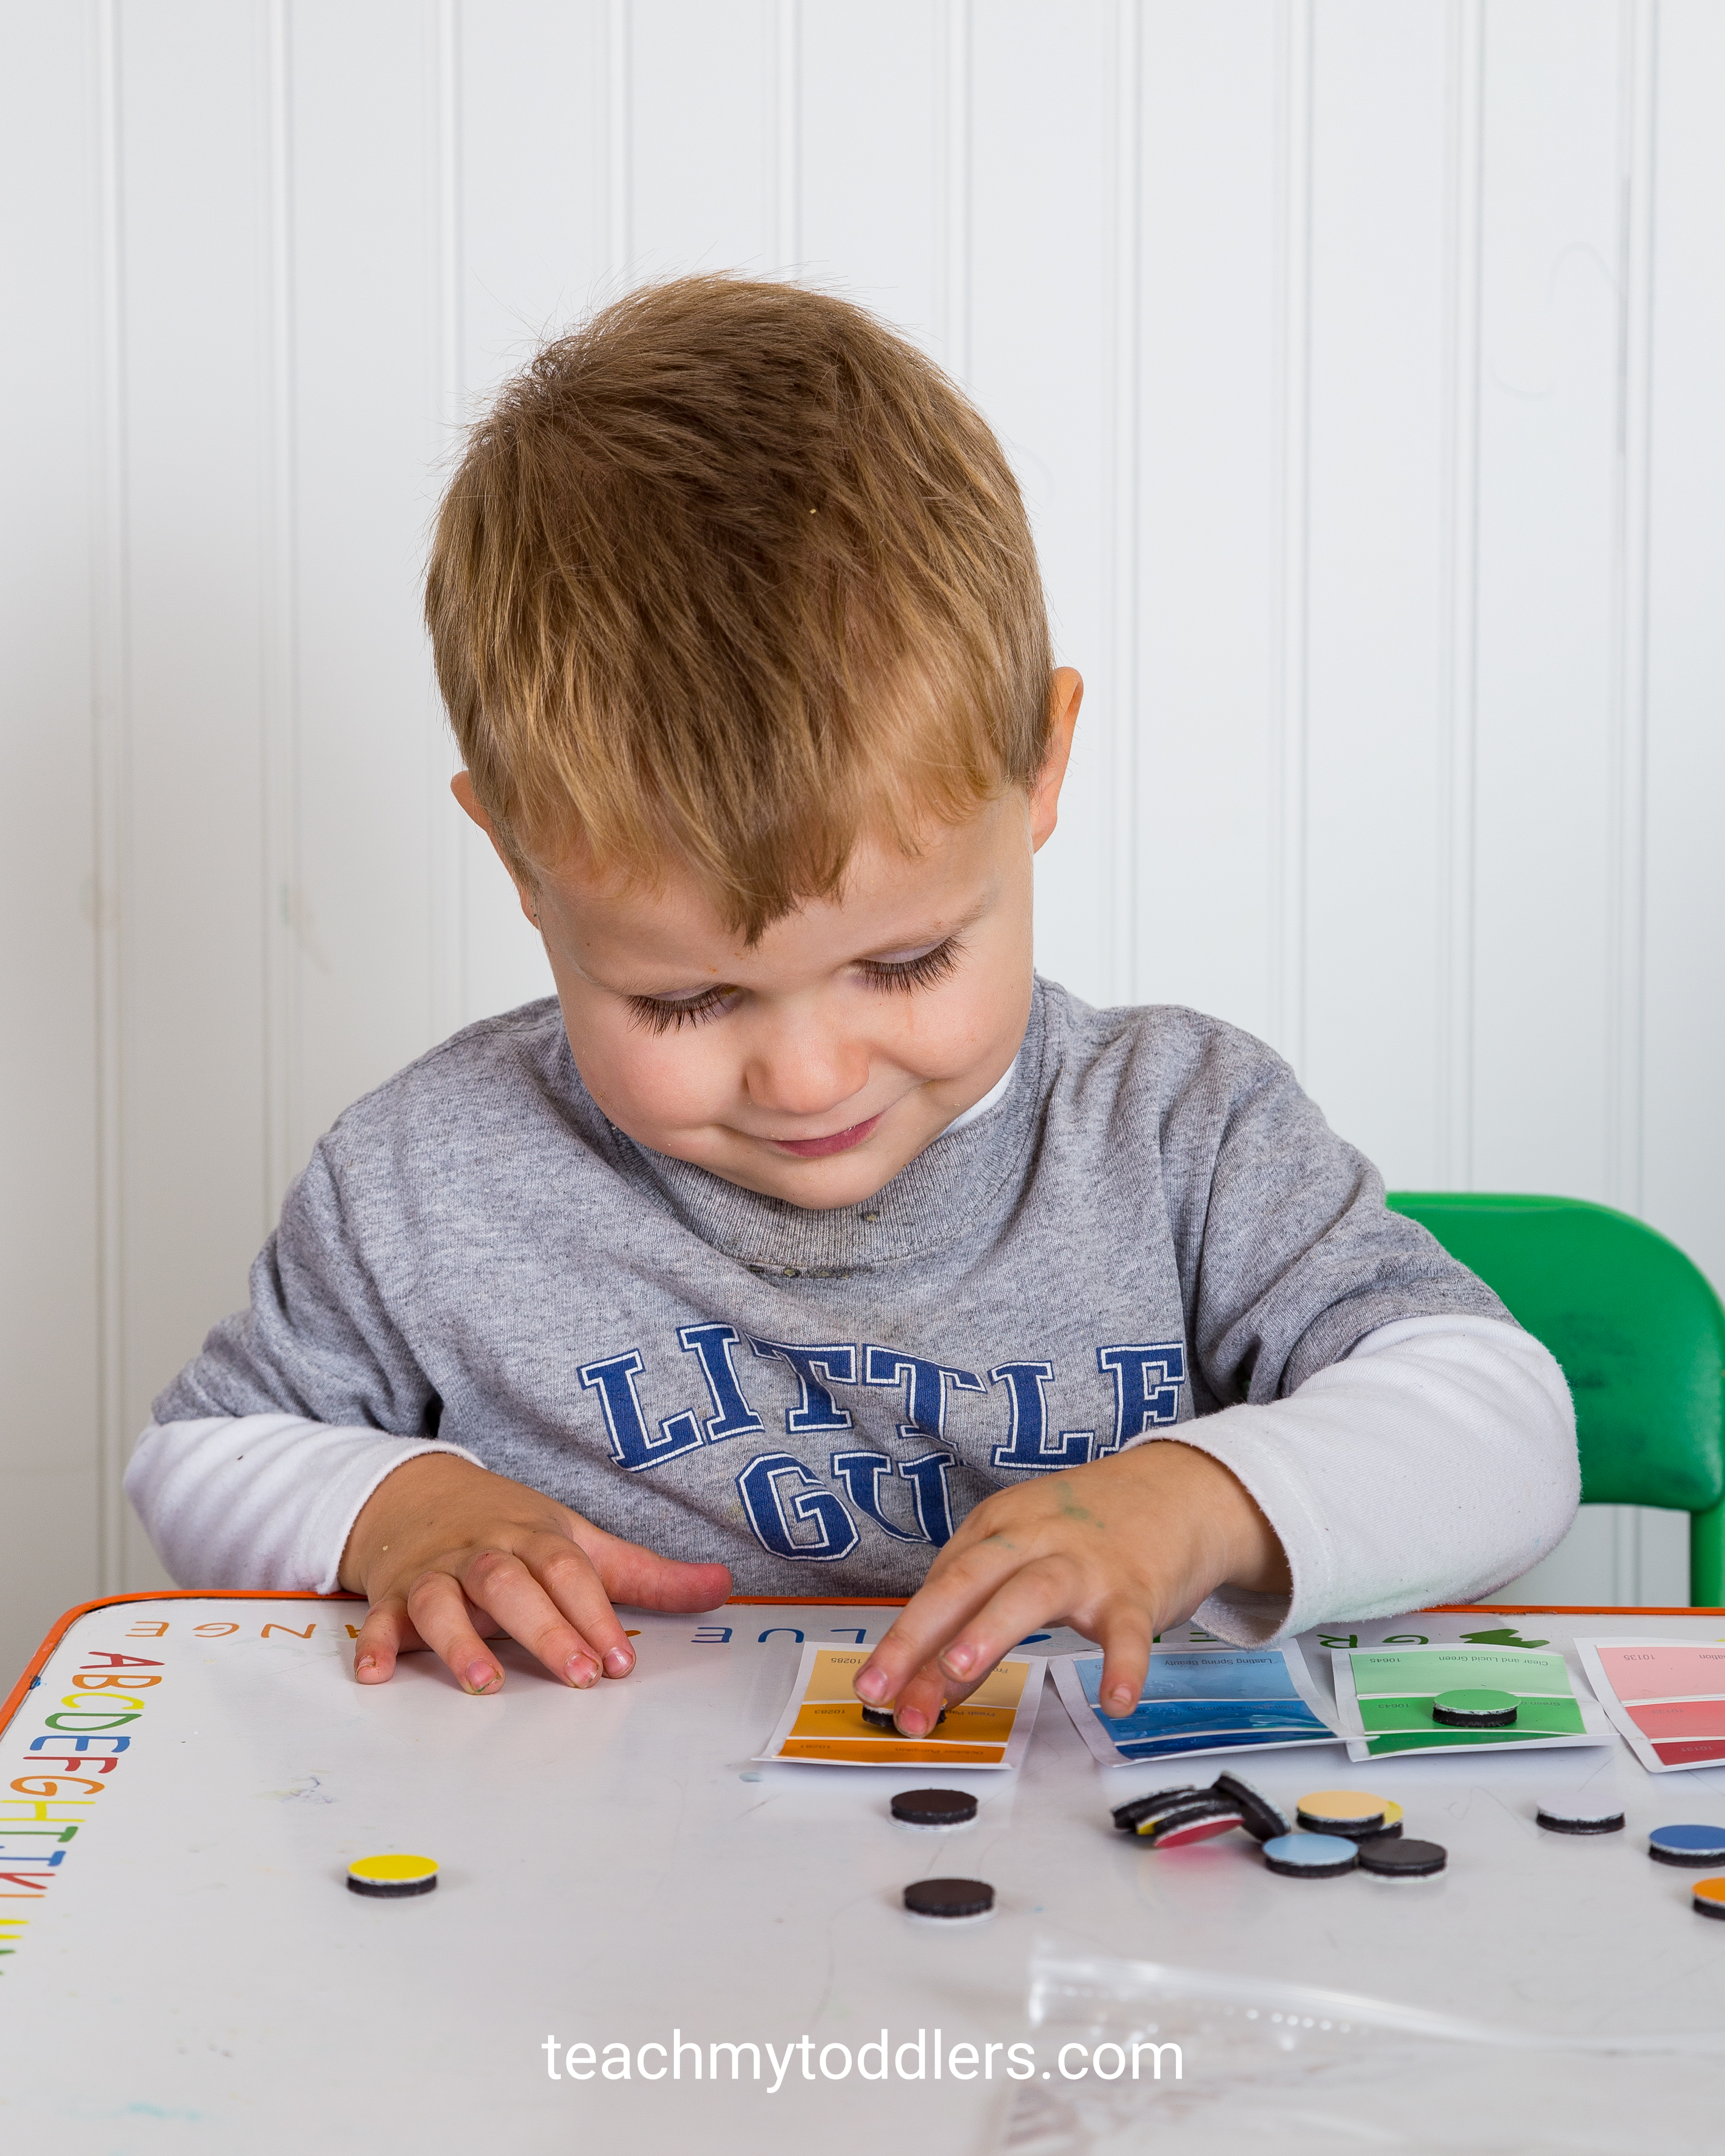 A fun matching game to teach your toddlers colors using paint chips